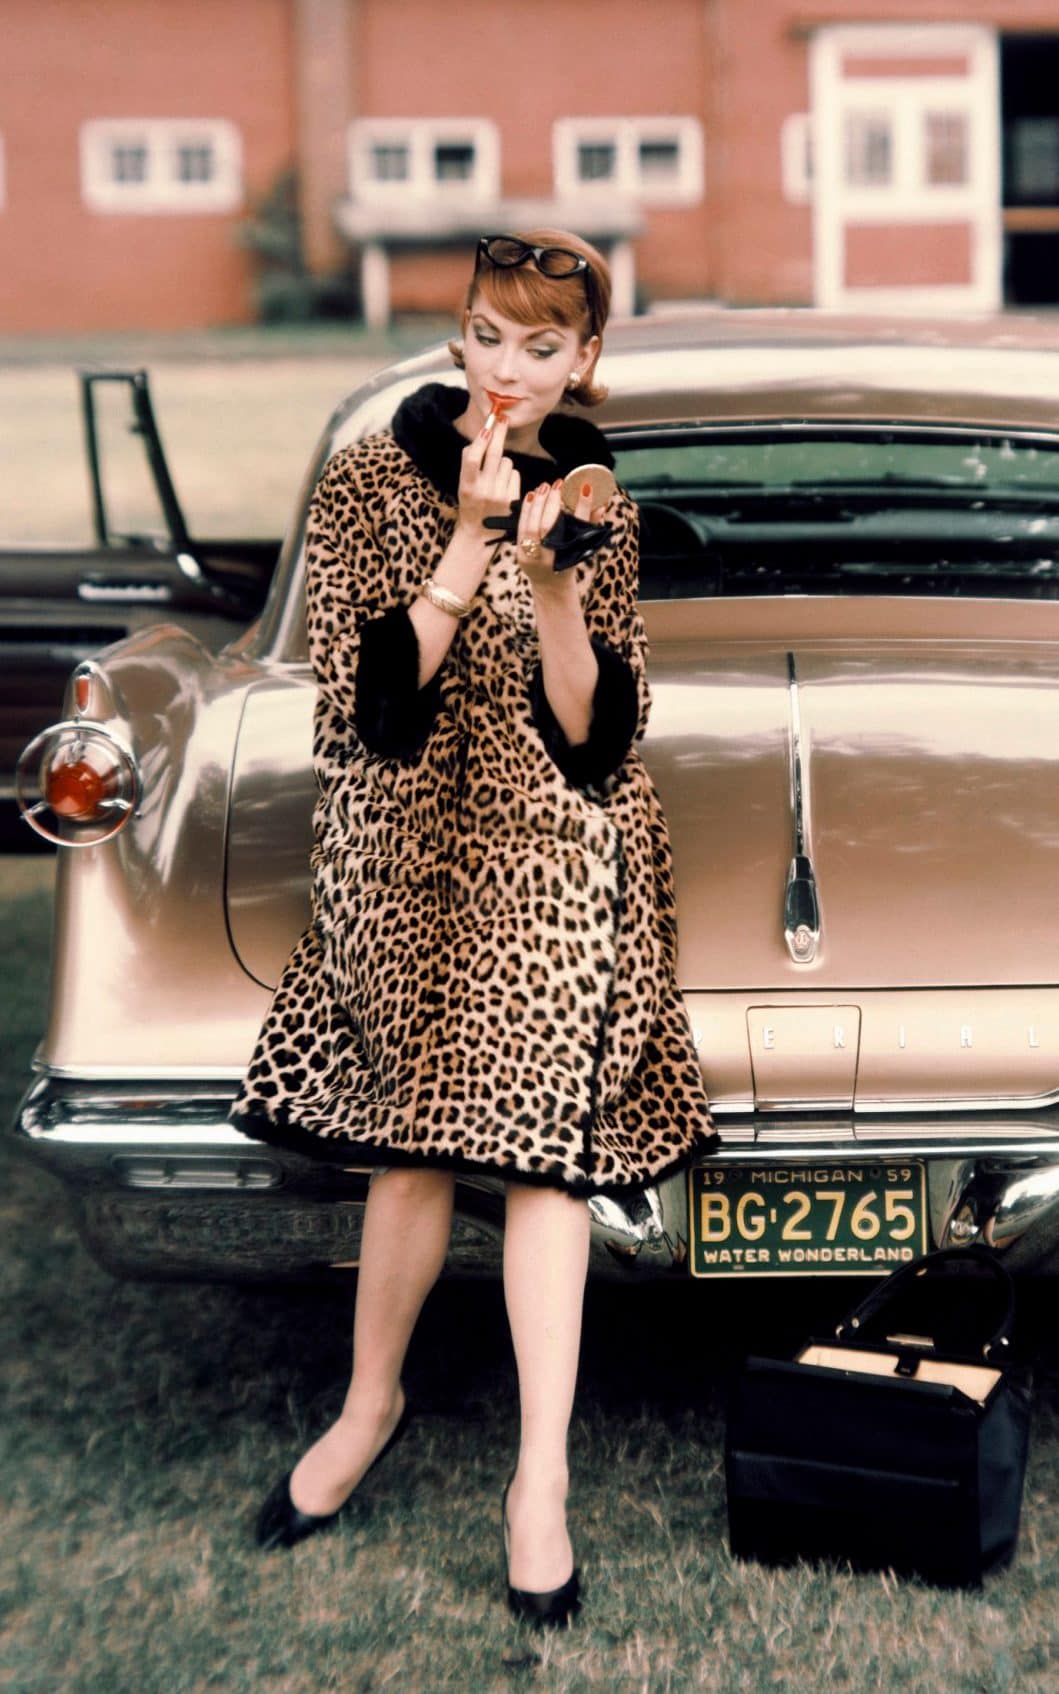 A model wears leopard print in Vogue, 1959 - Conde Nast Collection Editorial